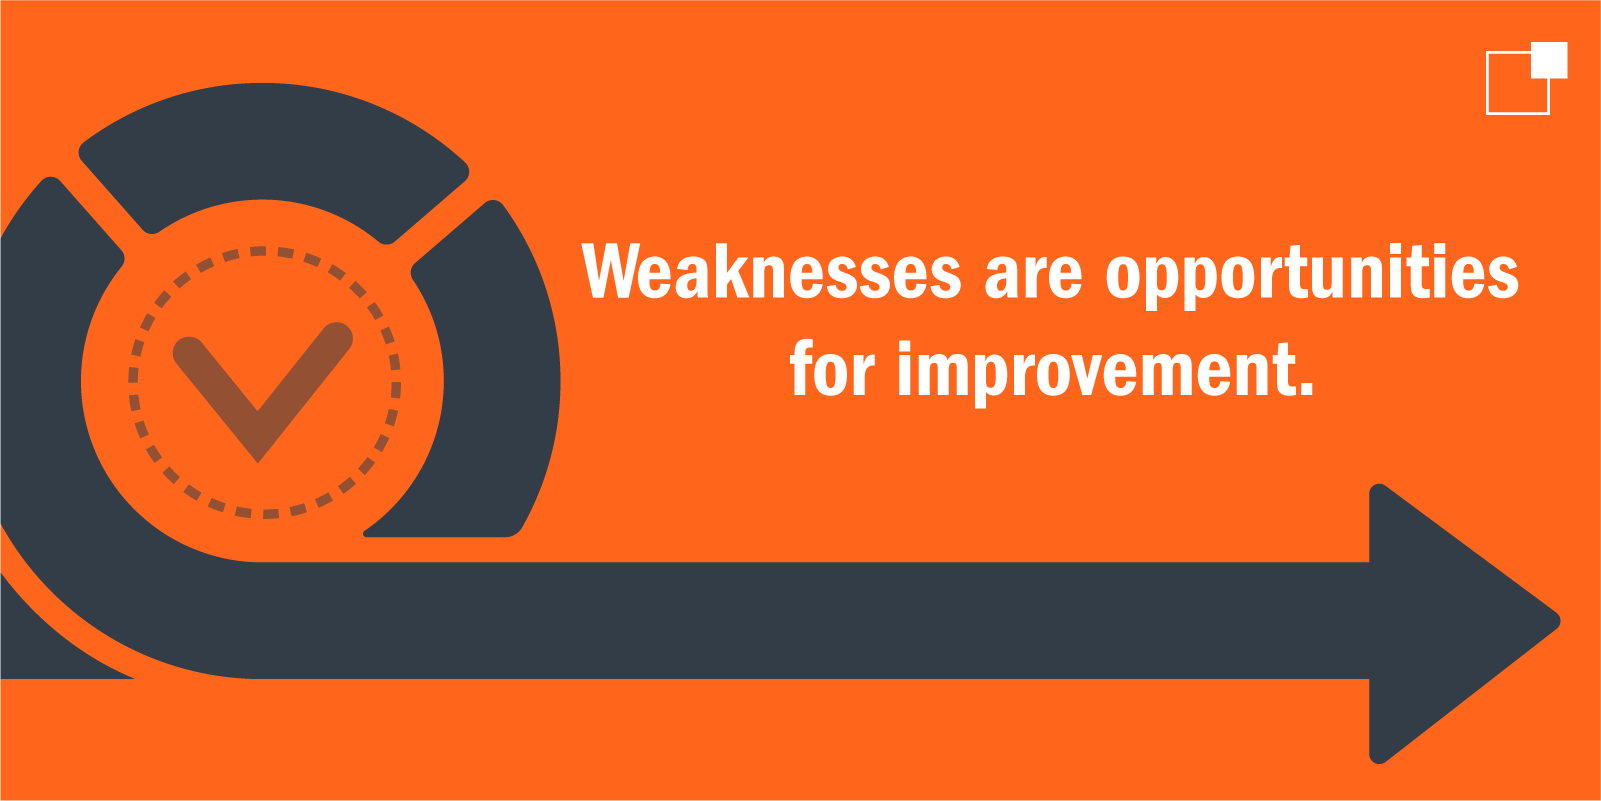 Weaknesses are opportunities for improvement.